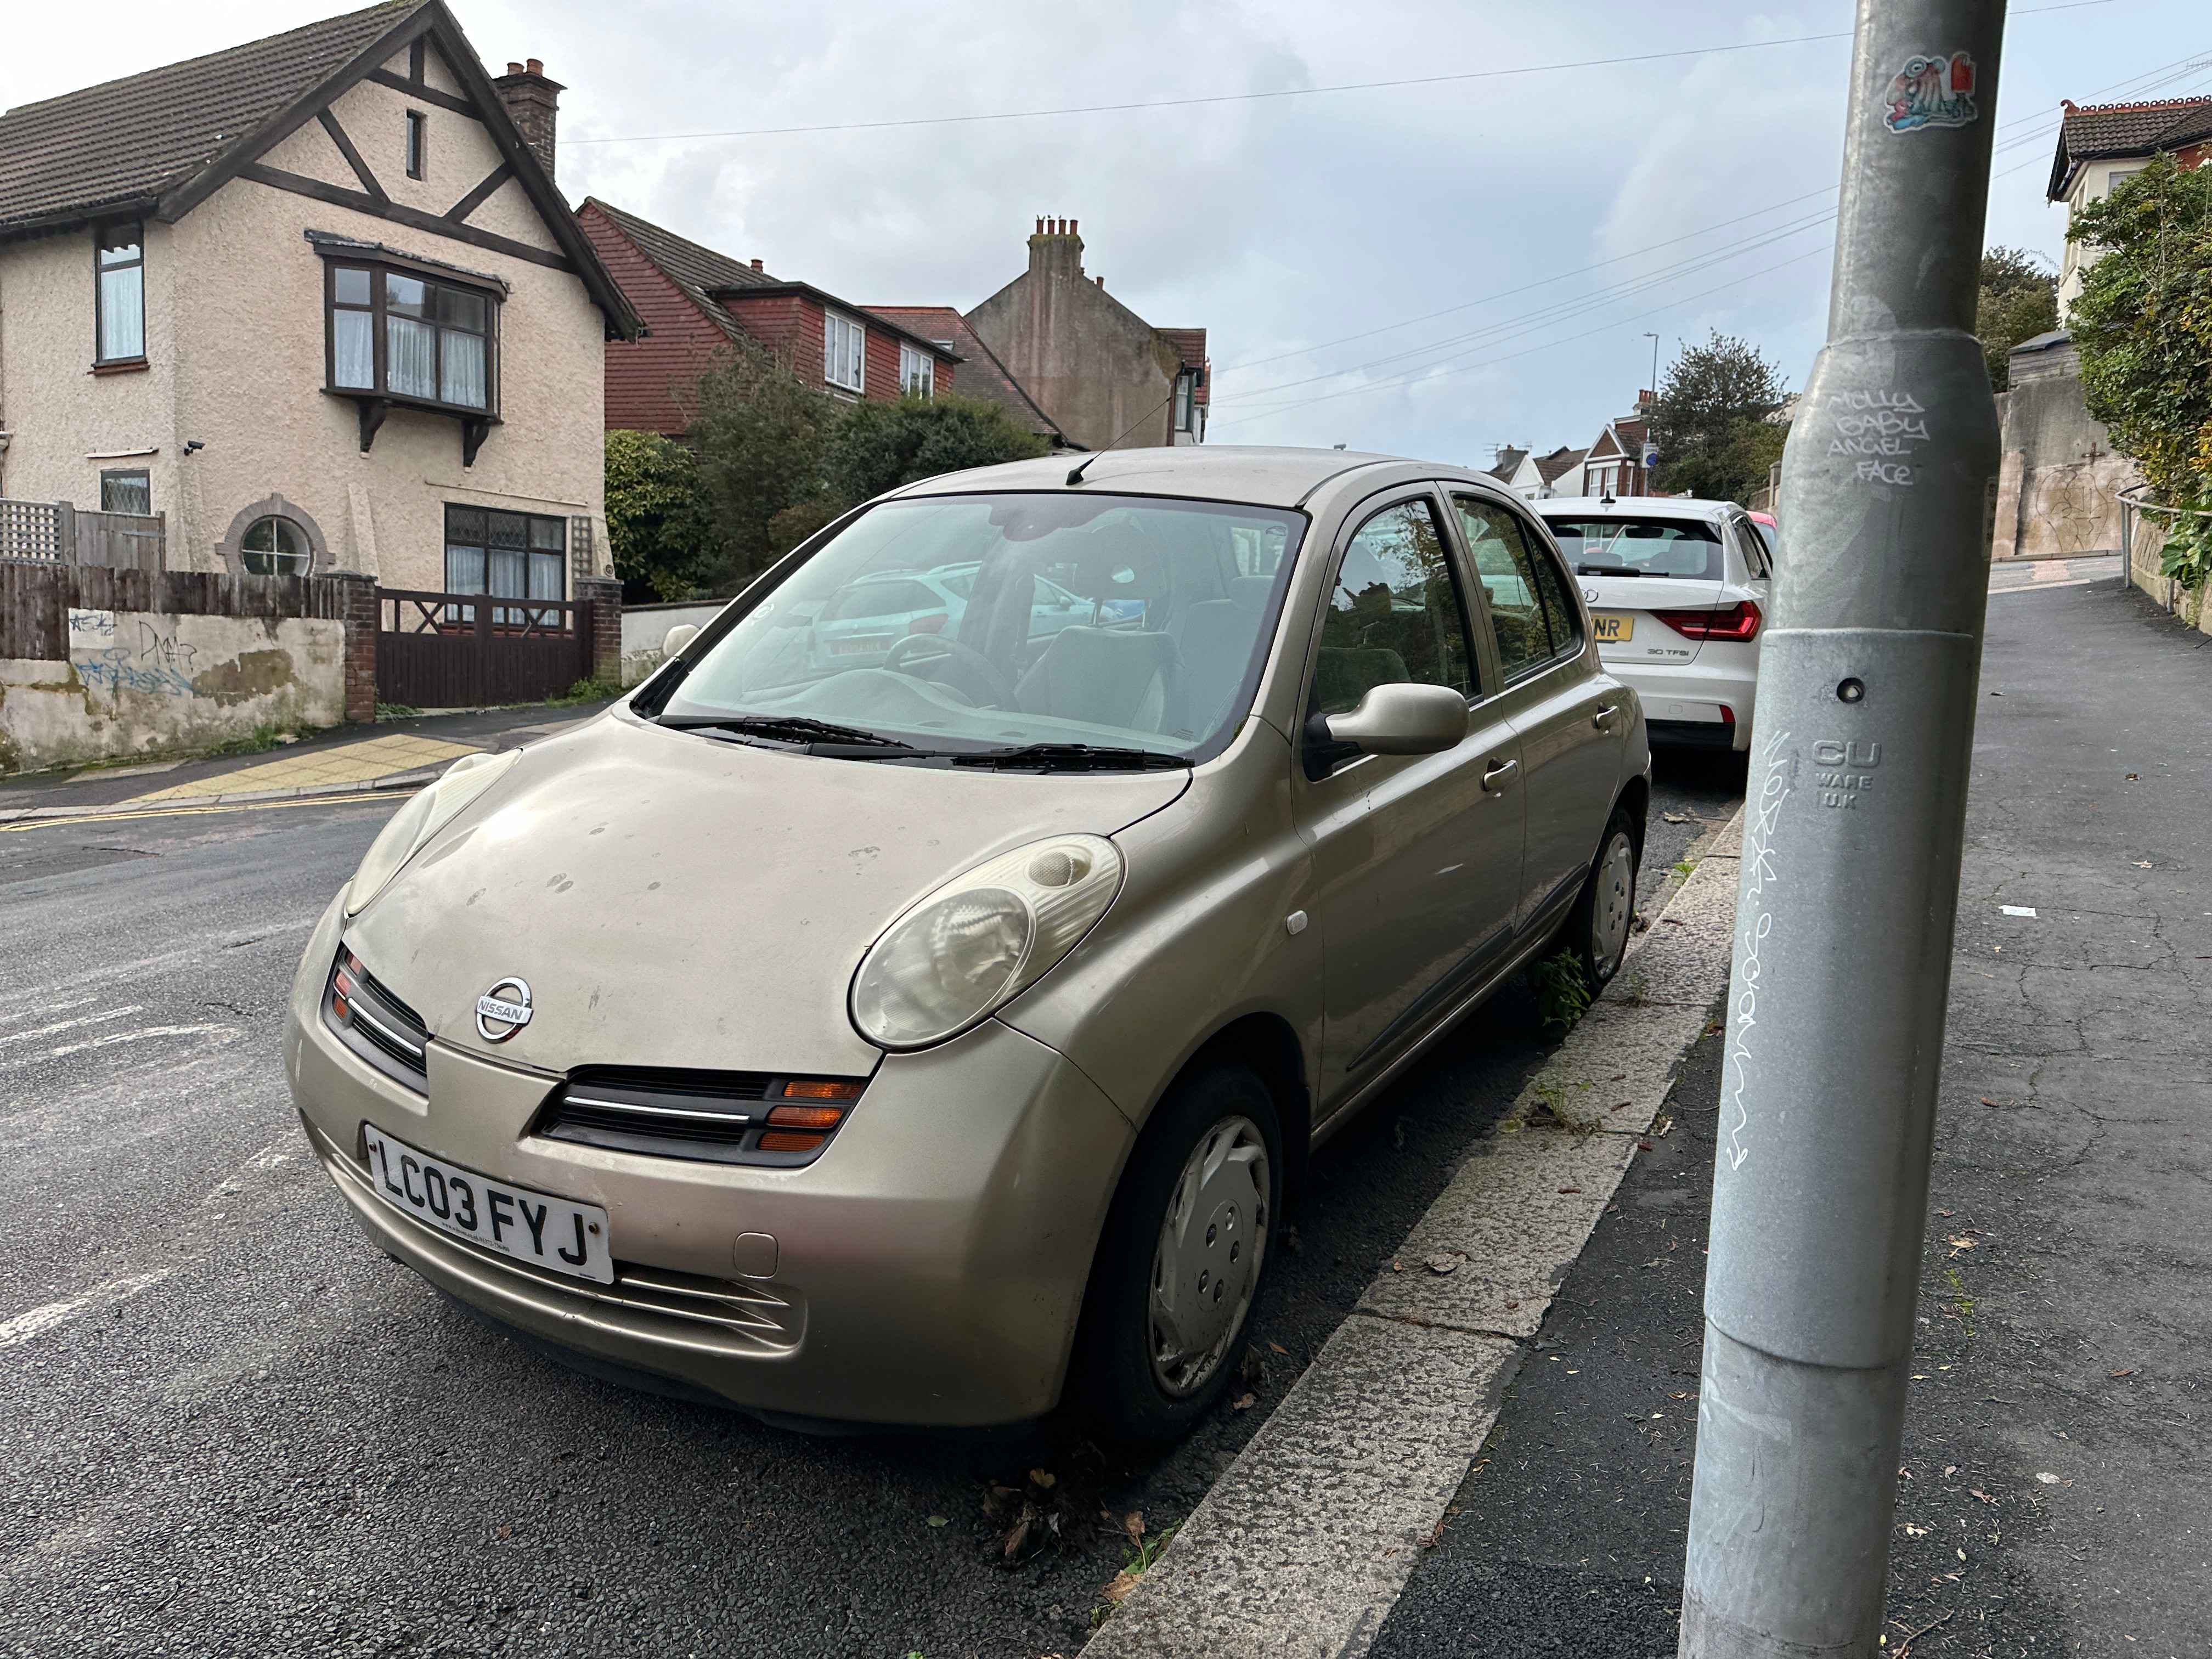 Photograph of LC03 FYJ - a Gold Nissan Micra parked in Hollingdean by a non-resident, and potentially abandoned. The ninth of seventeen photographs supplied by the residents of Hollingdean.